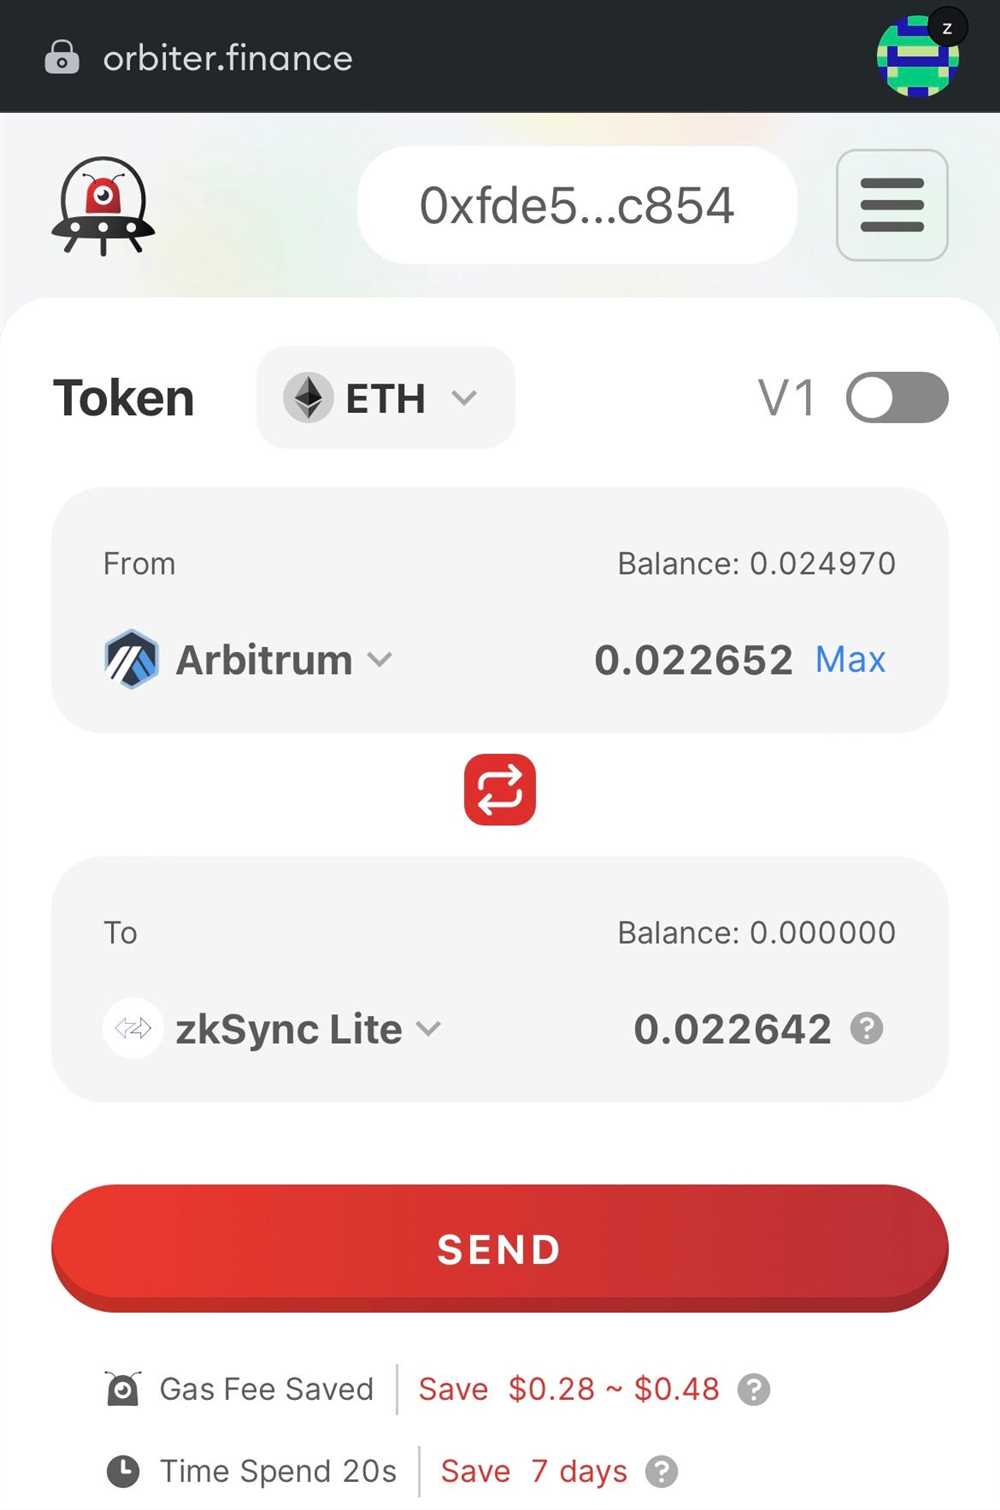 Step 2: Transferring Your Assets from Ethereum to zkSync